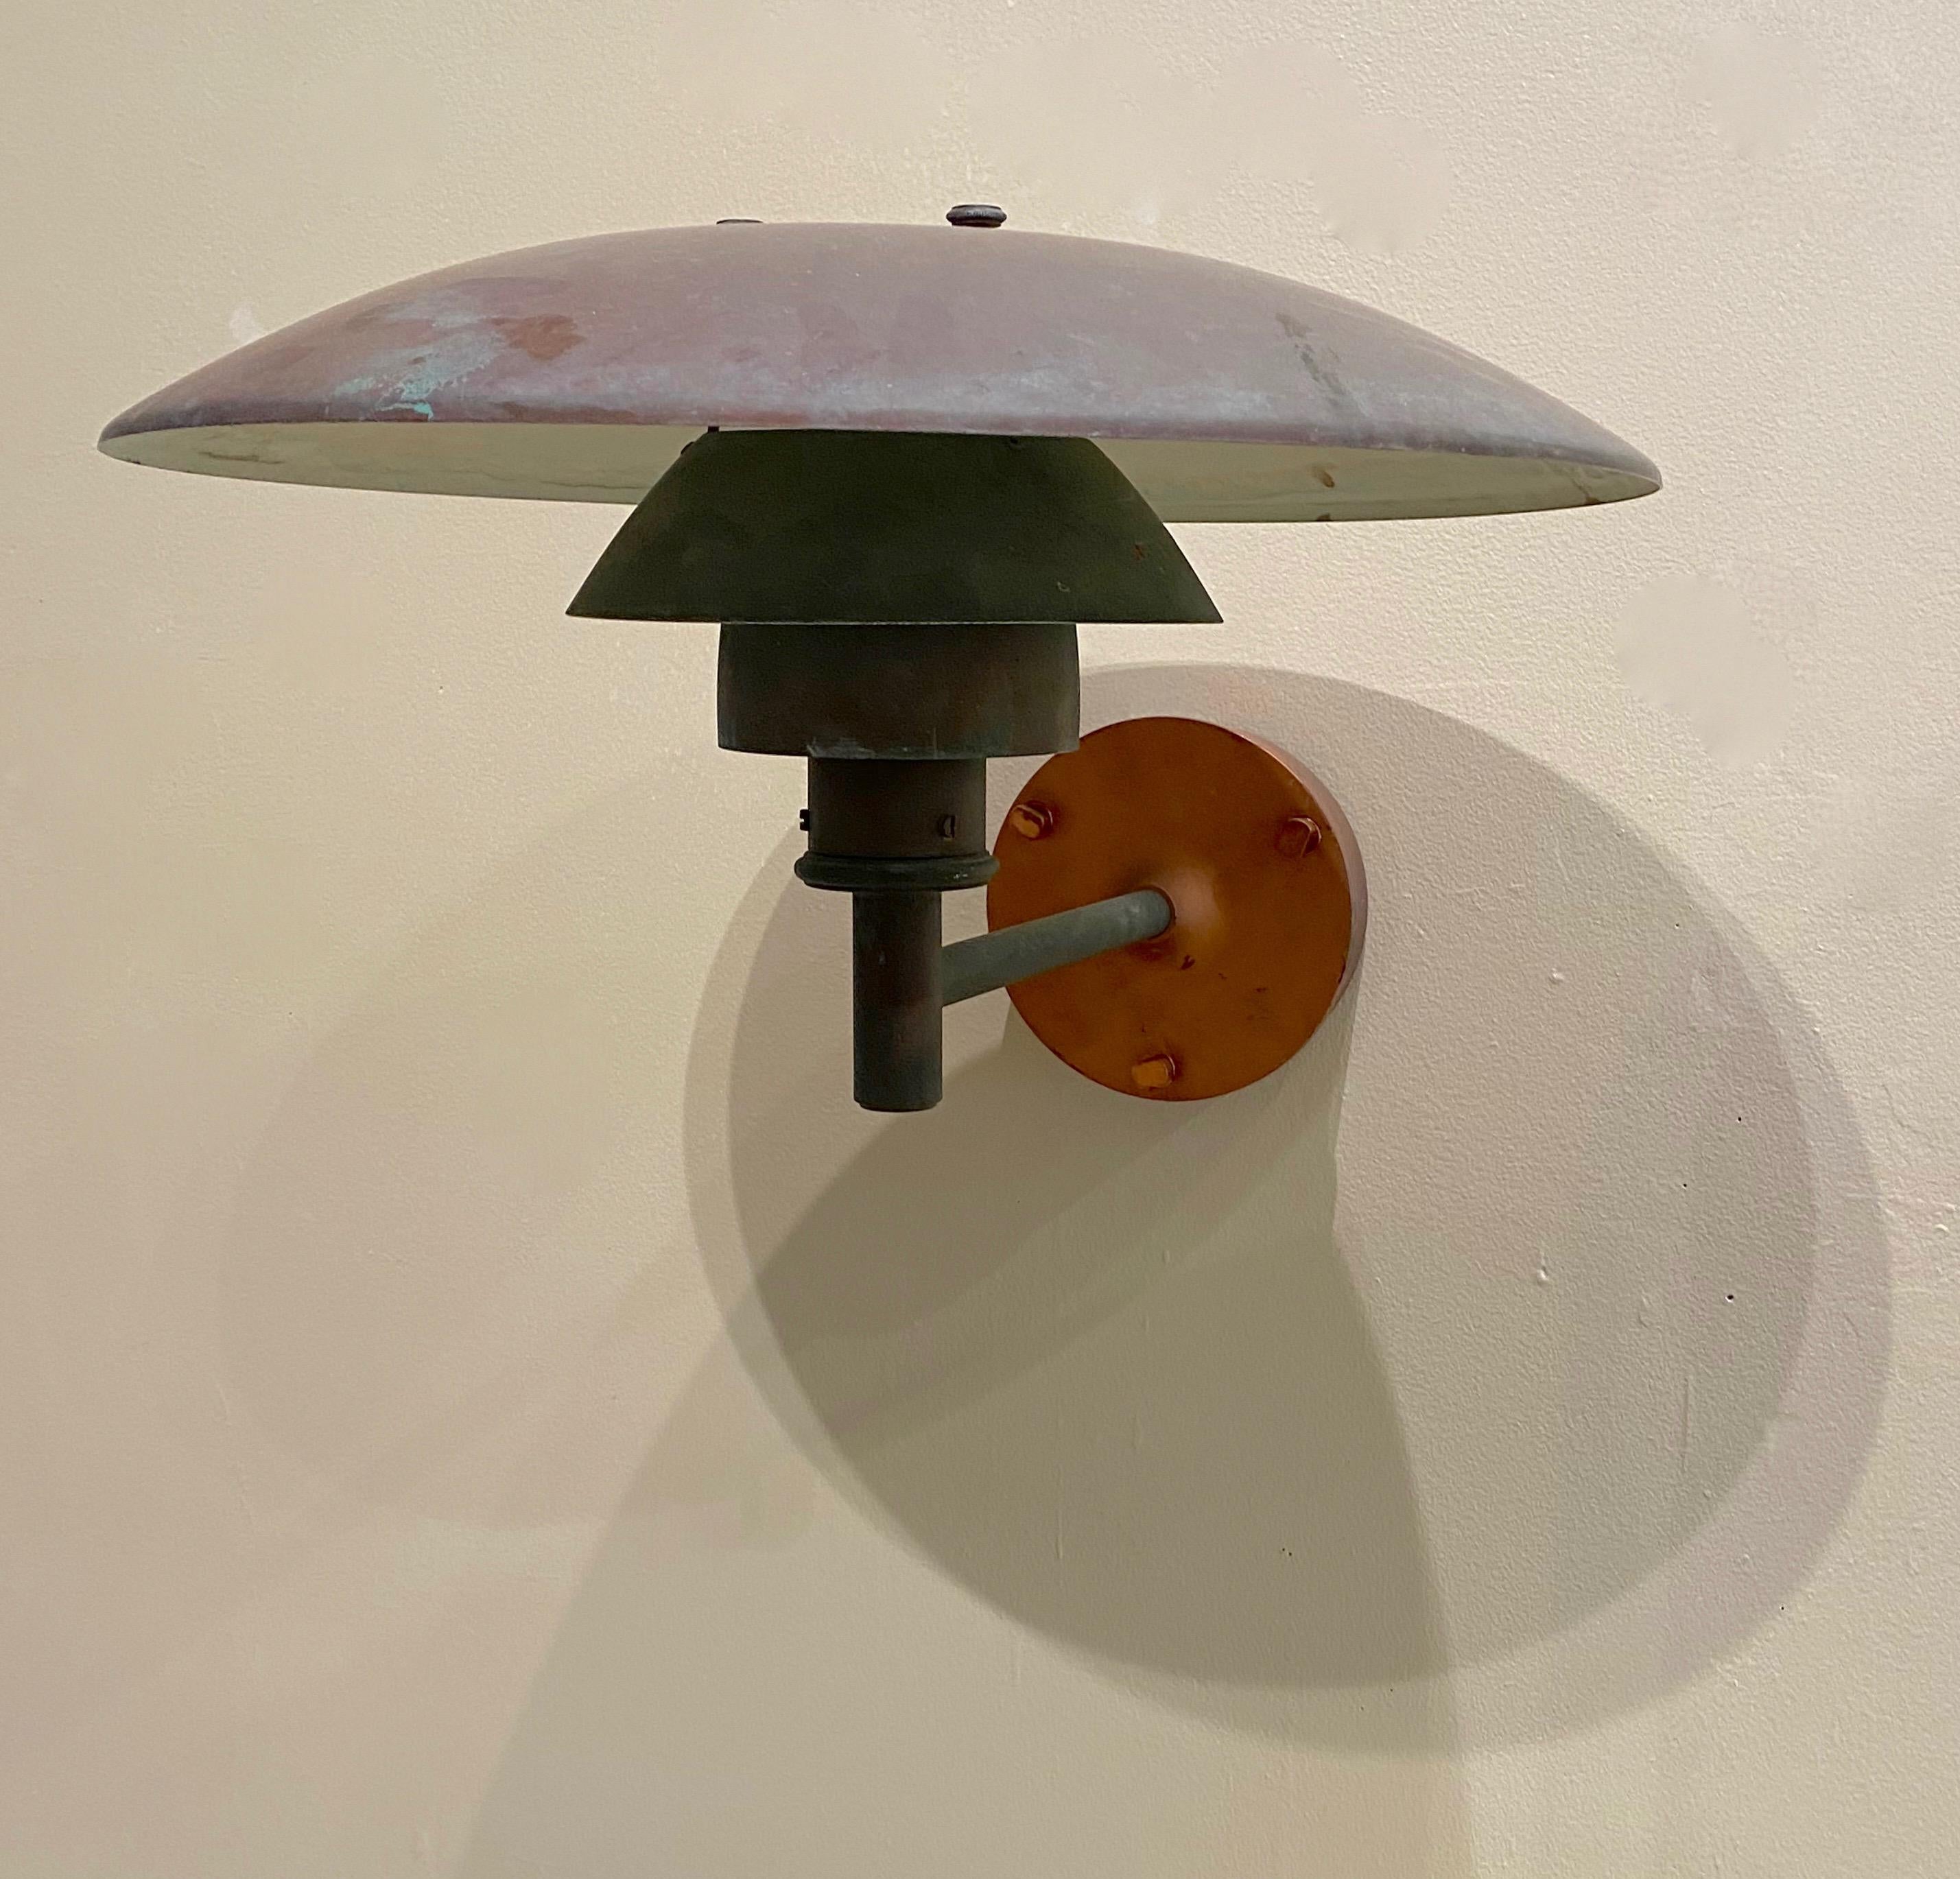 Solid copper wall sconce by Louis Poulsen the PH 4.5 / 3 and manufactured by Poul Henningsen of Denmark. The intent of the design by Poulsen was to eliminate glare with the concentric rings and the top shade that directs the light downward. The lamp